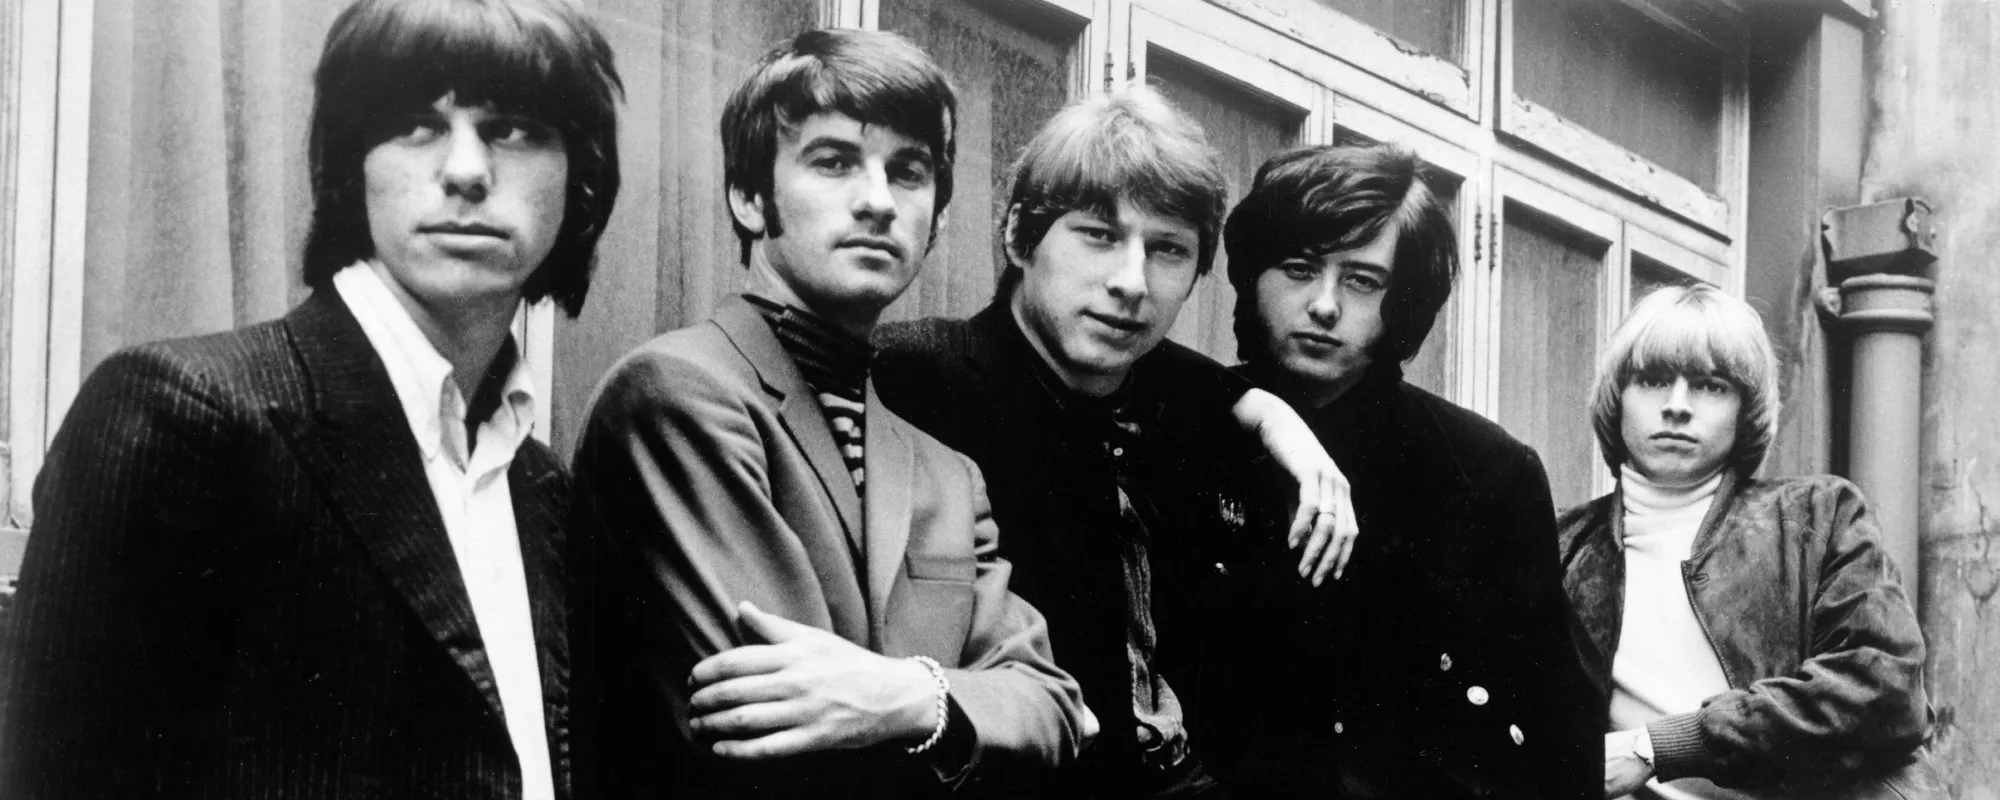 Psychedelic Boogie: The Story Behind “Over Under Sideways Down” by The Yardbirds